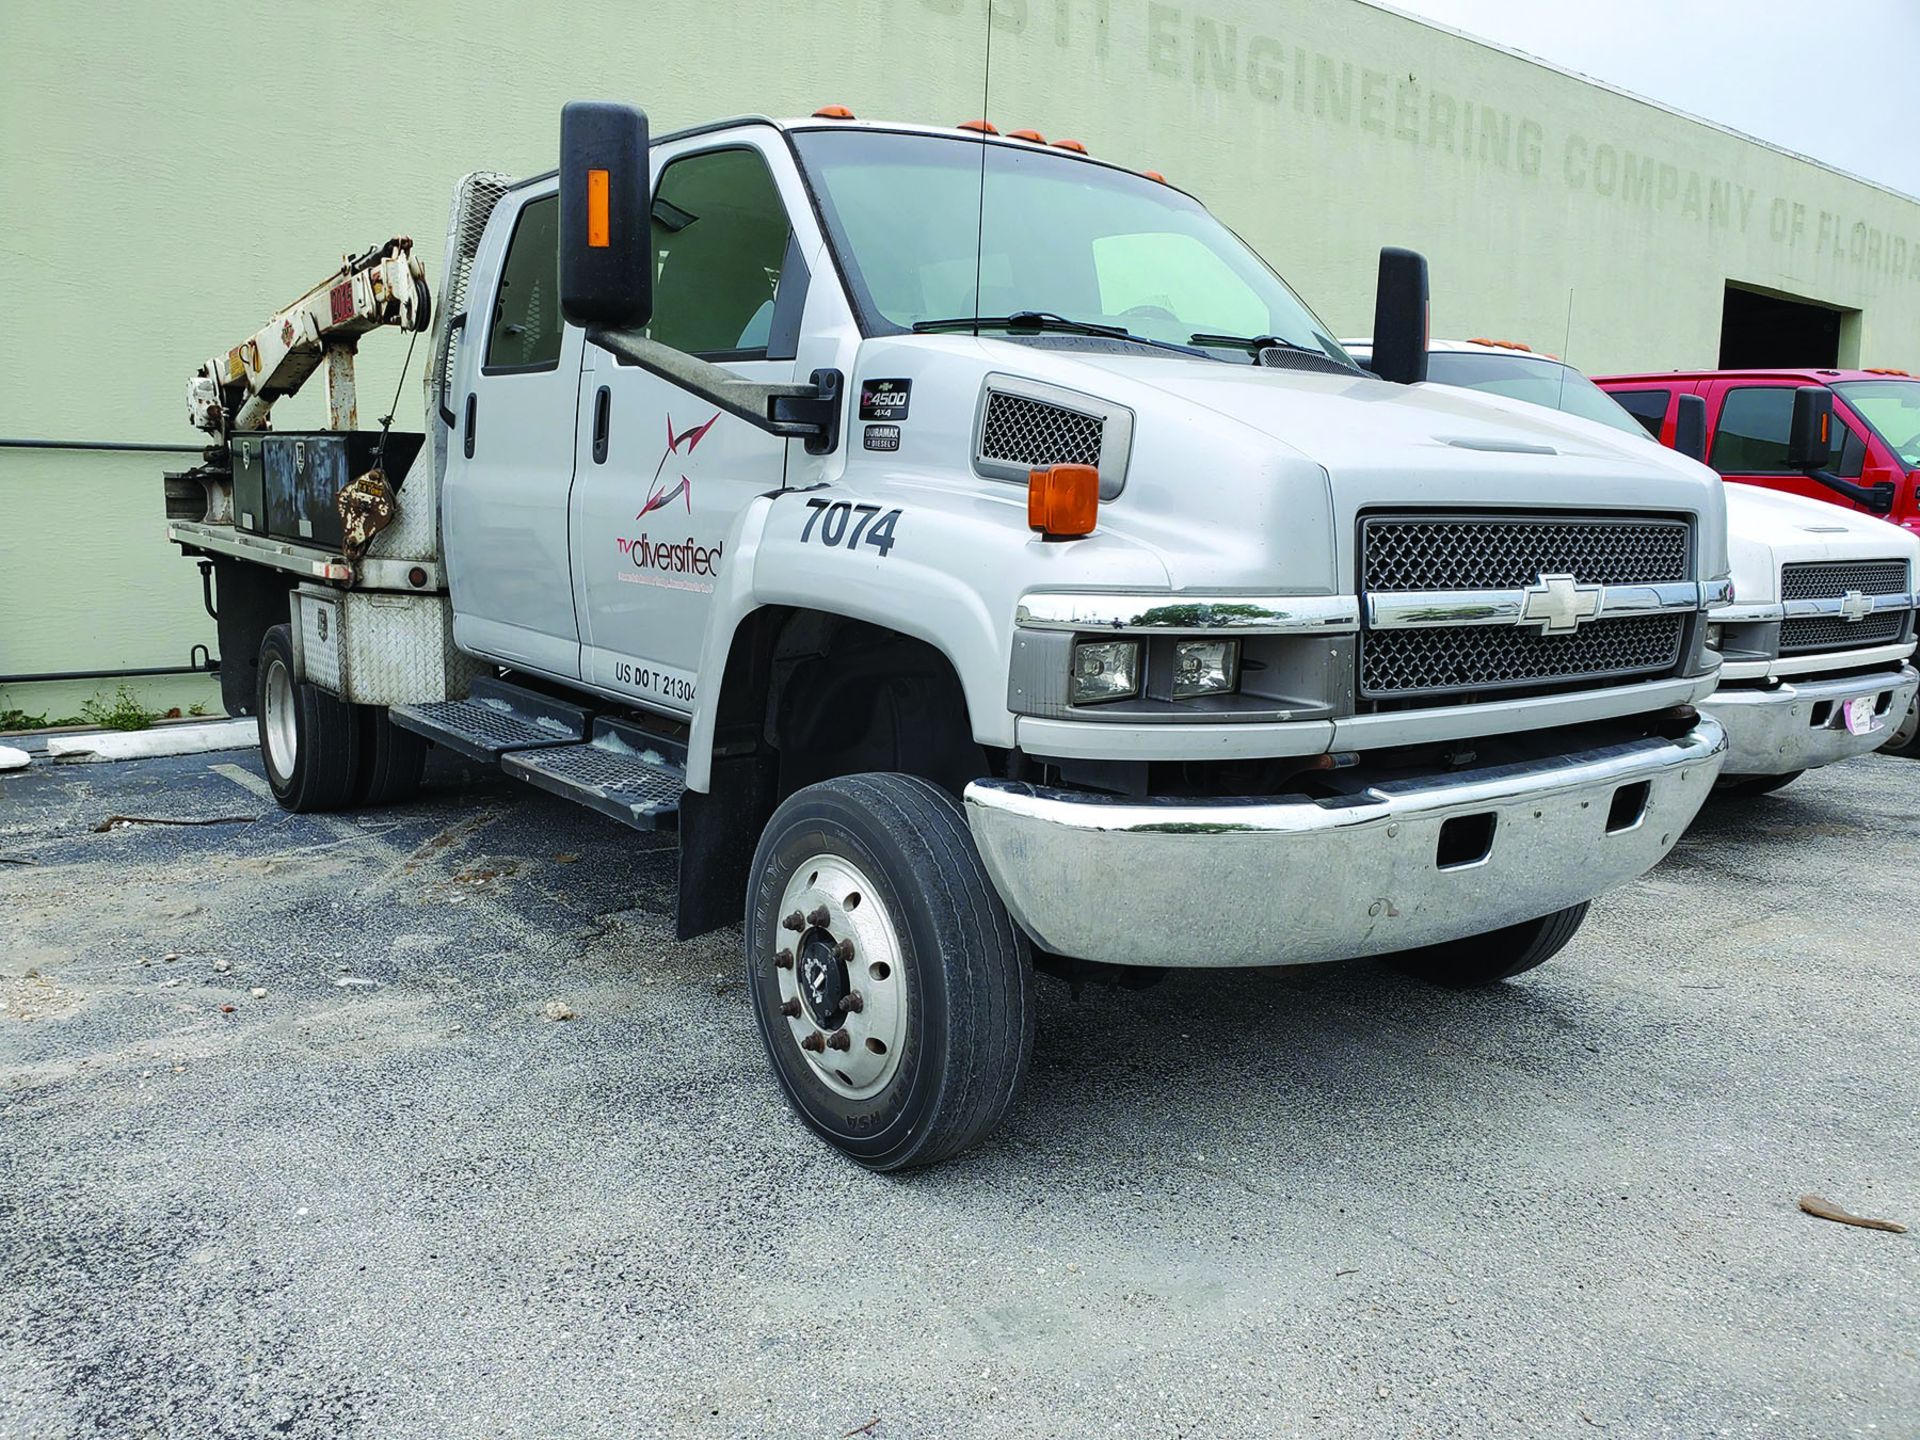 2006 CHEVROLET C4500 4X4 CREW CAB FLAT/STAKE BED TRUCK W/IMT 2015 TELESCOPING BOOM, 2.5 TON HOOK, - Image 12 of 19